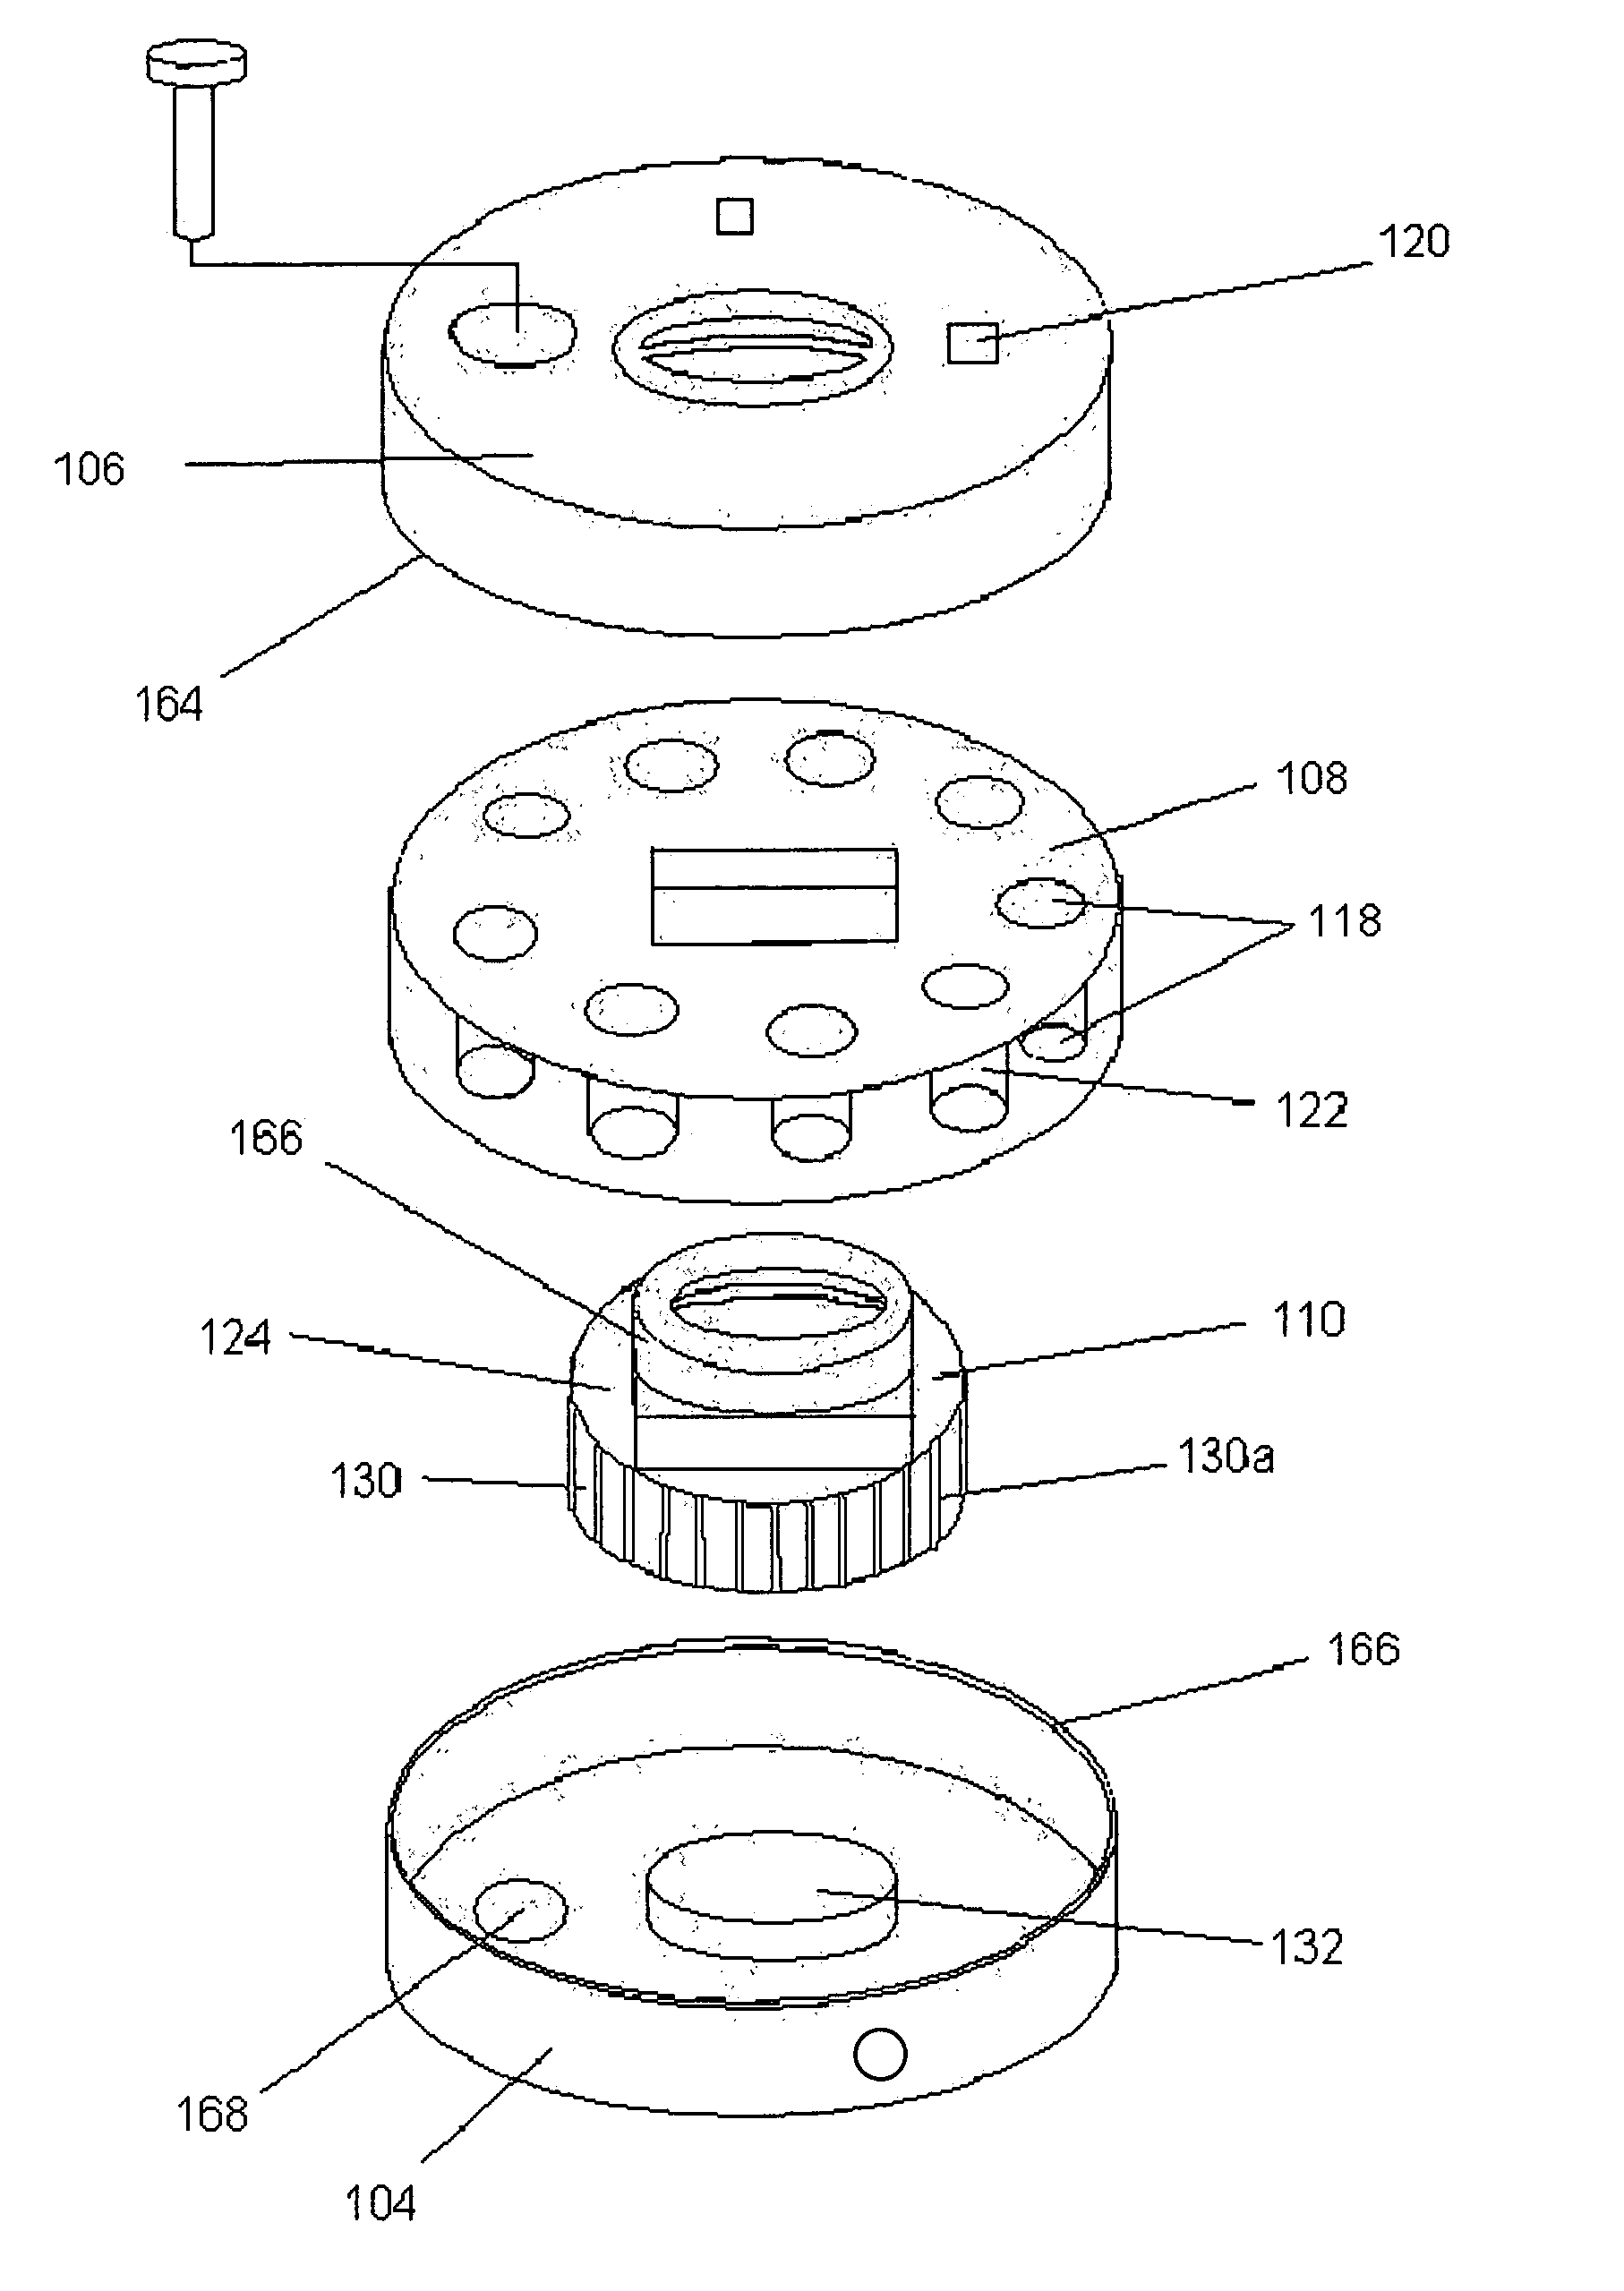 Apparatus, system, and method for a medication access control device